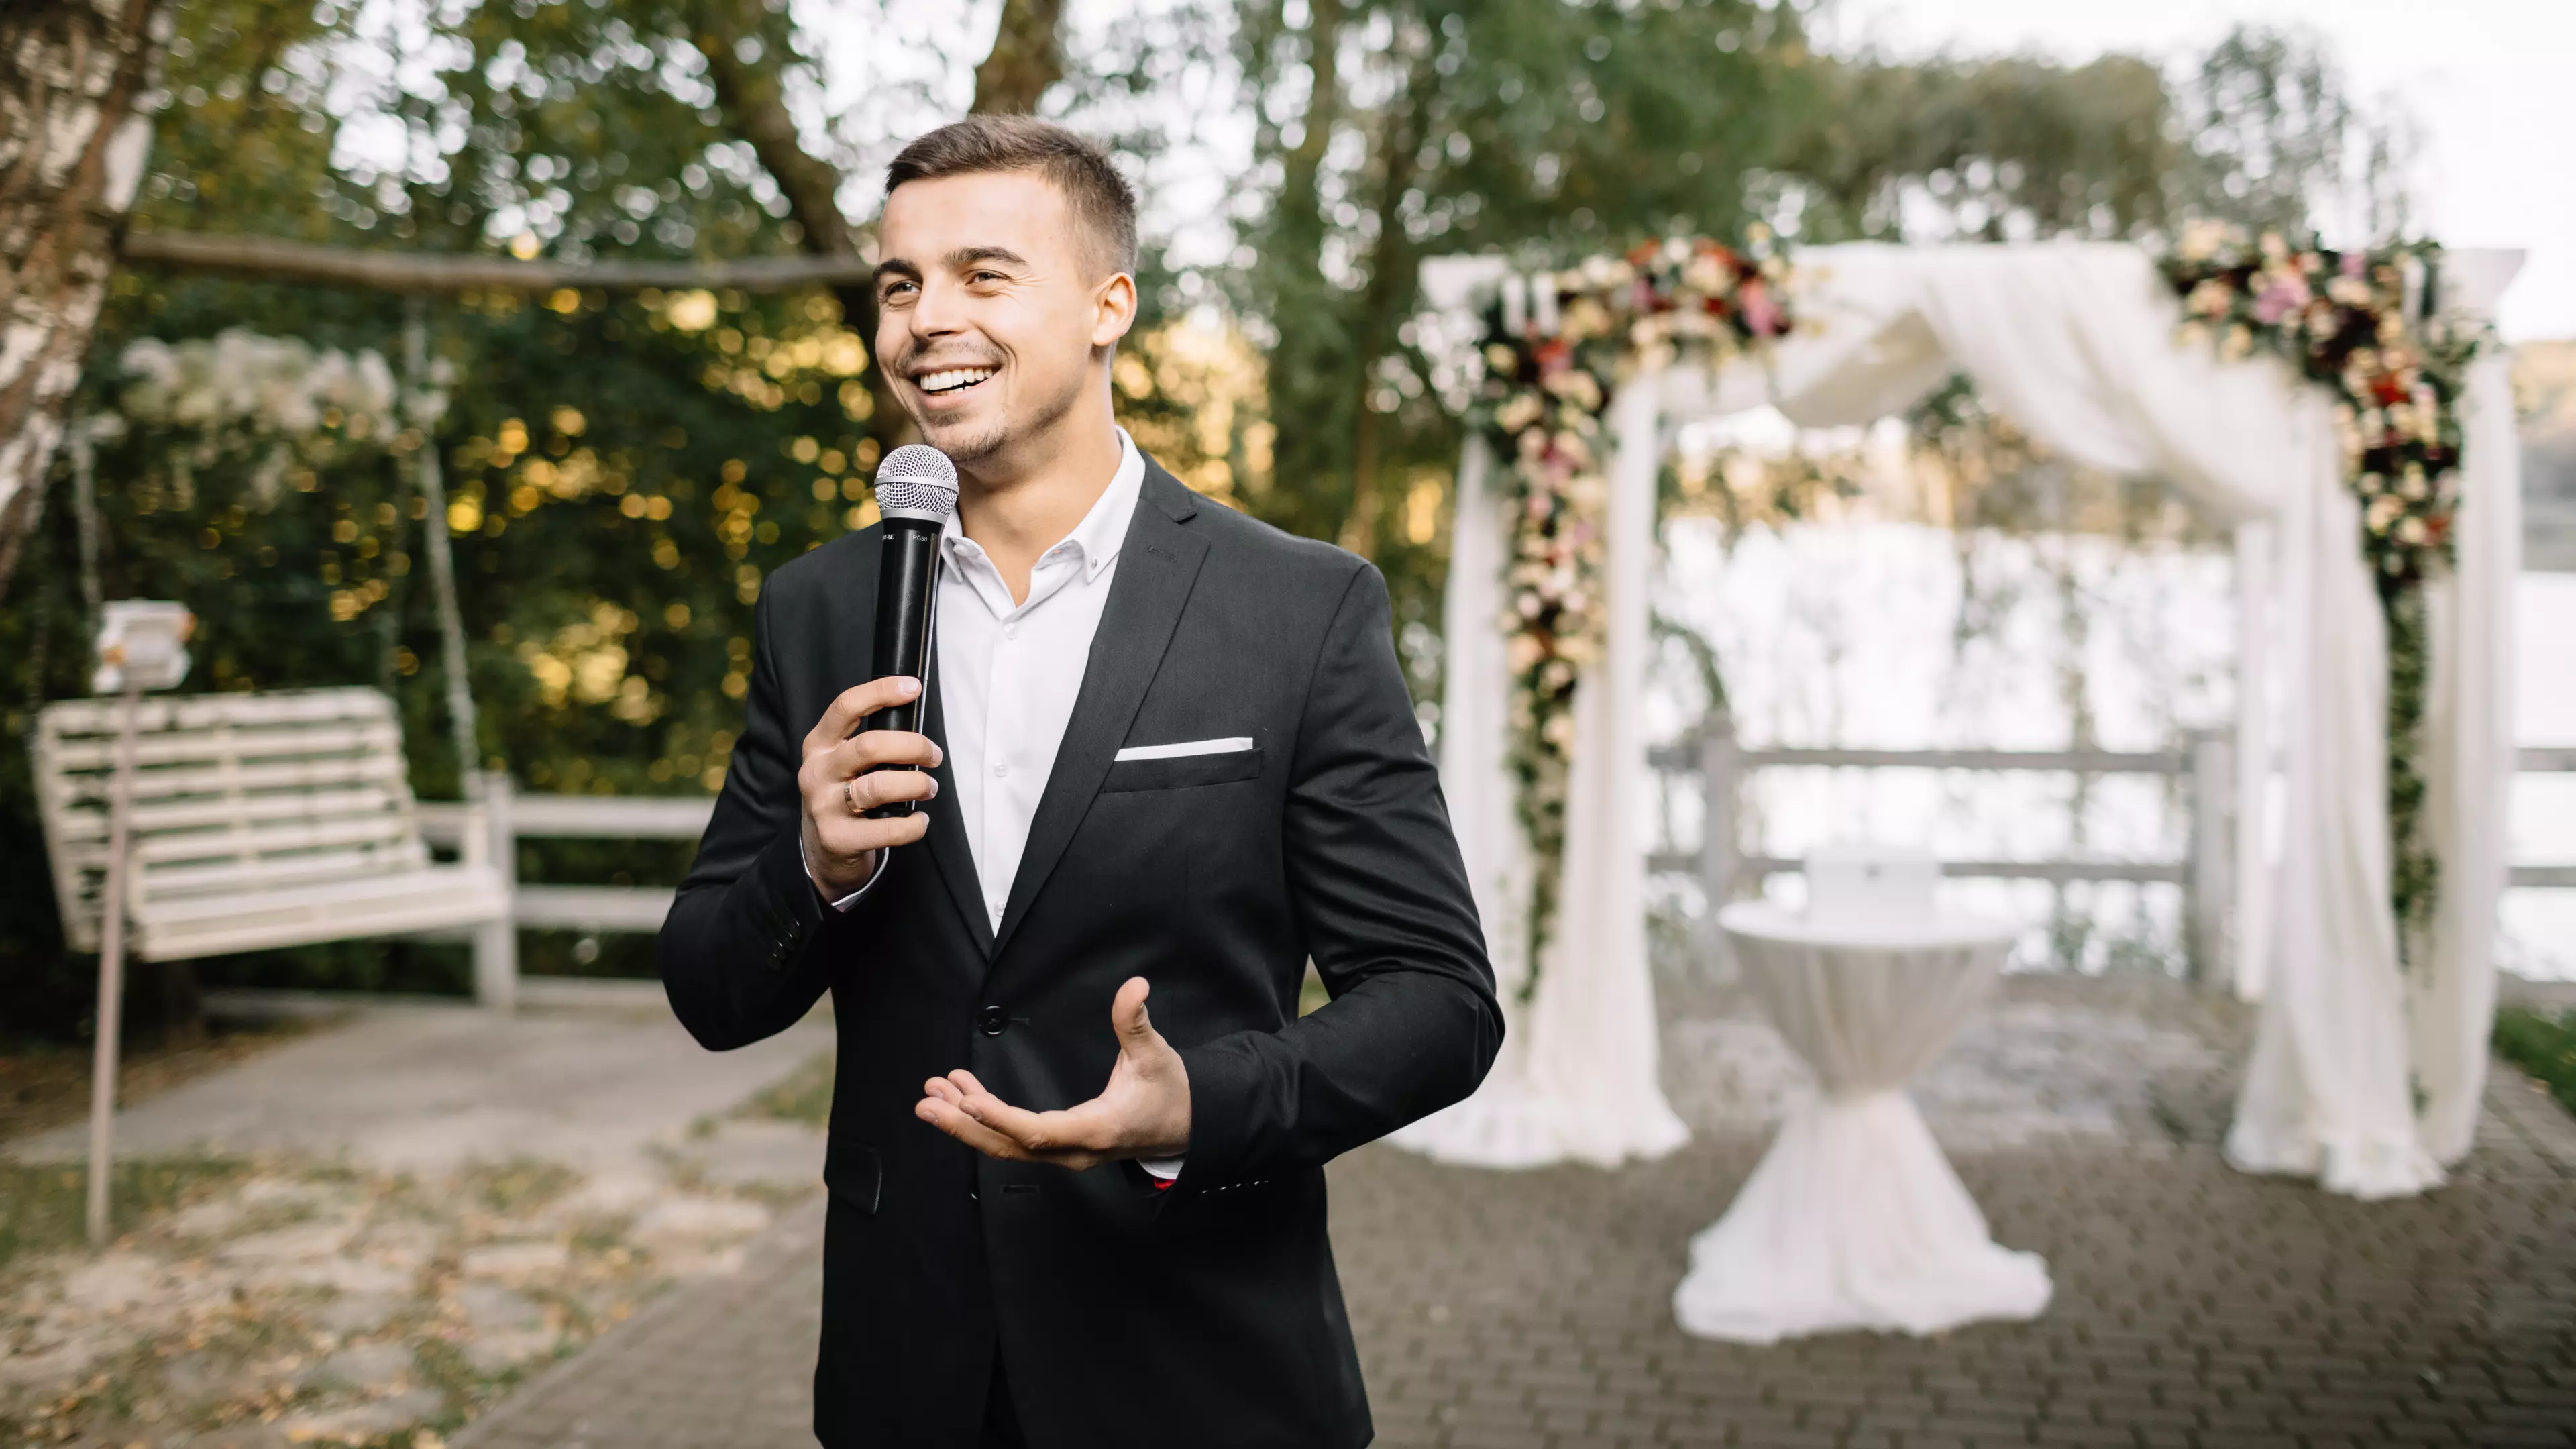 Best Man Asked To Leave Wedding After Insulting Bridesmaids During Speech